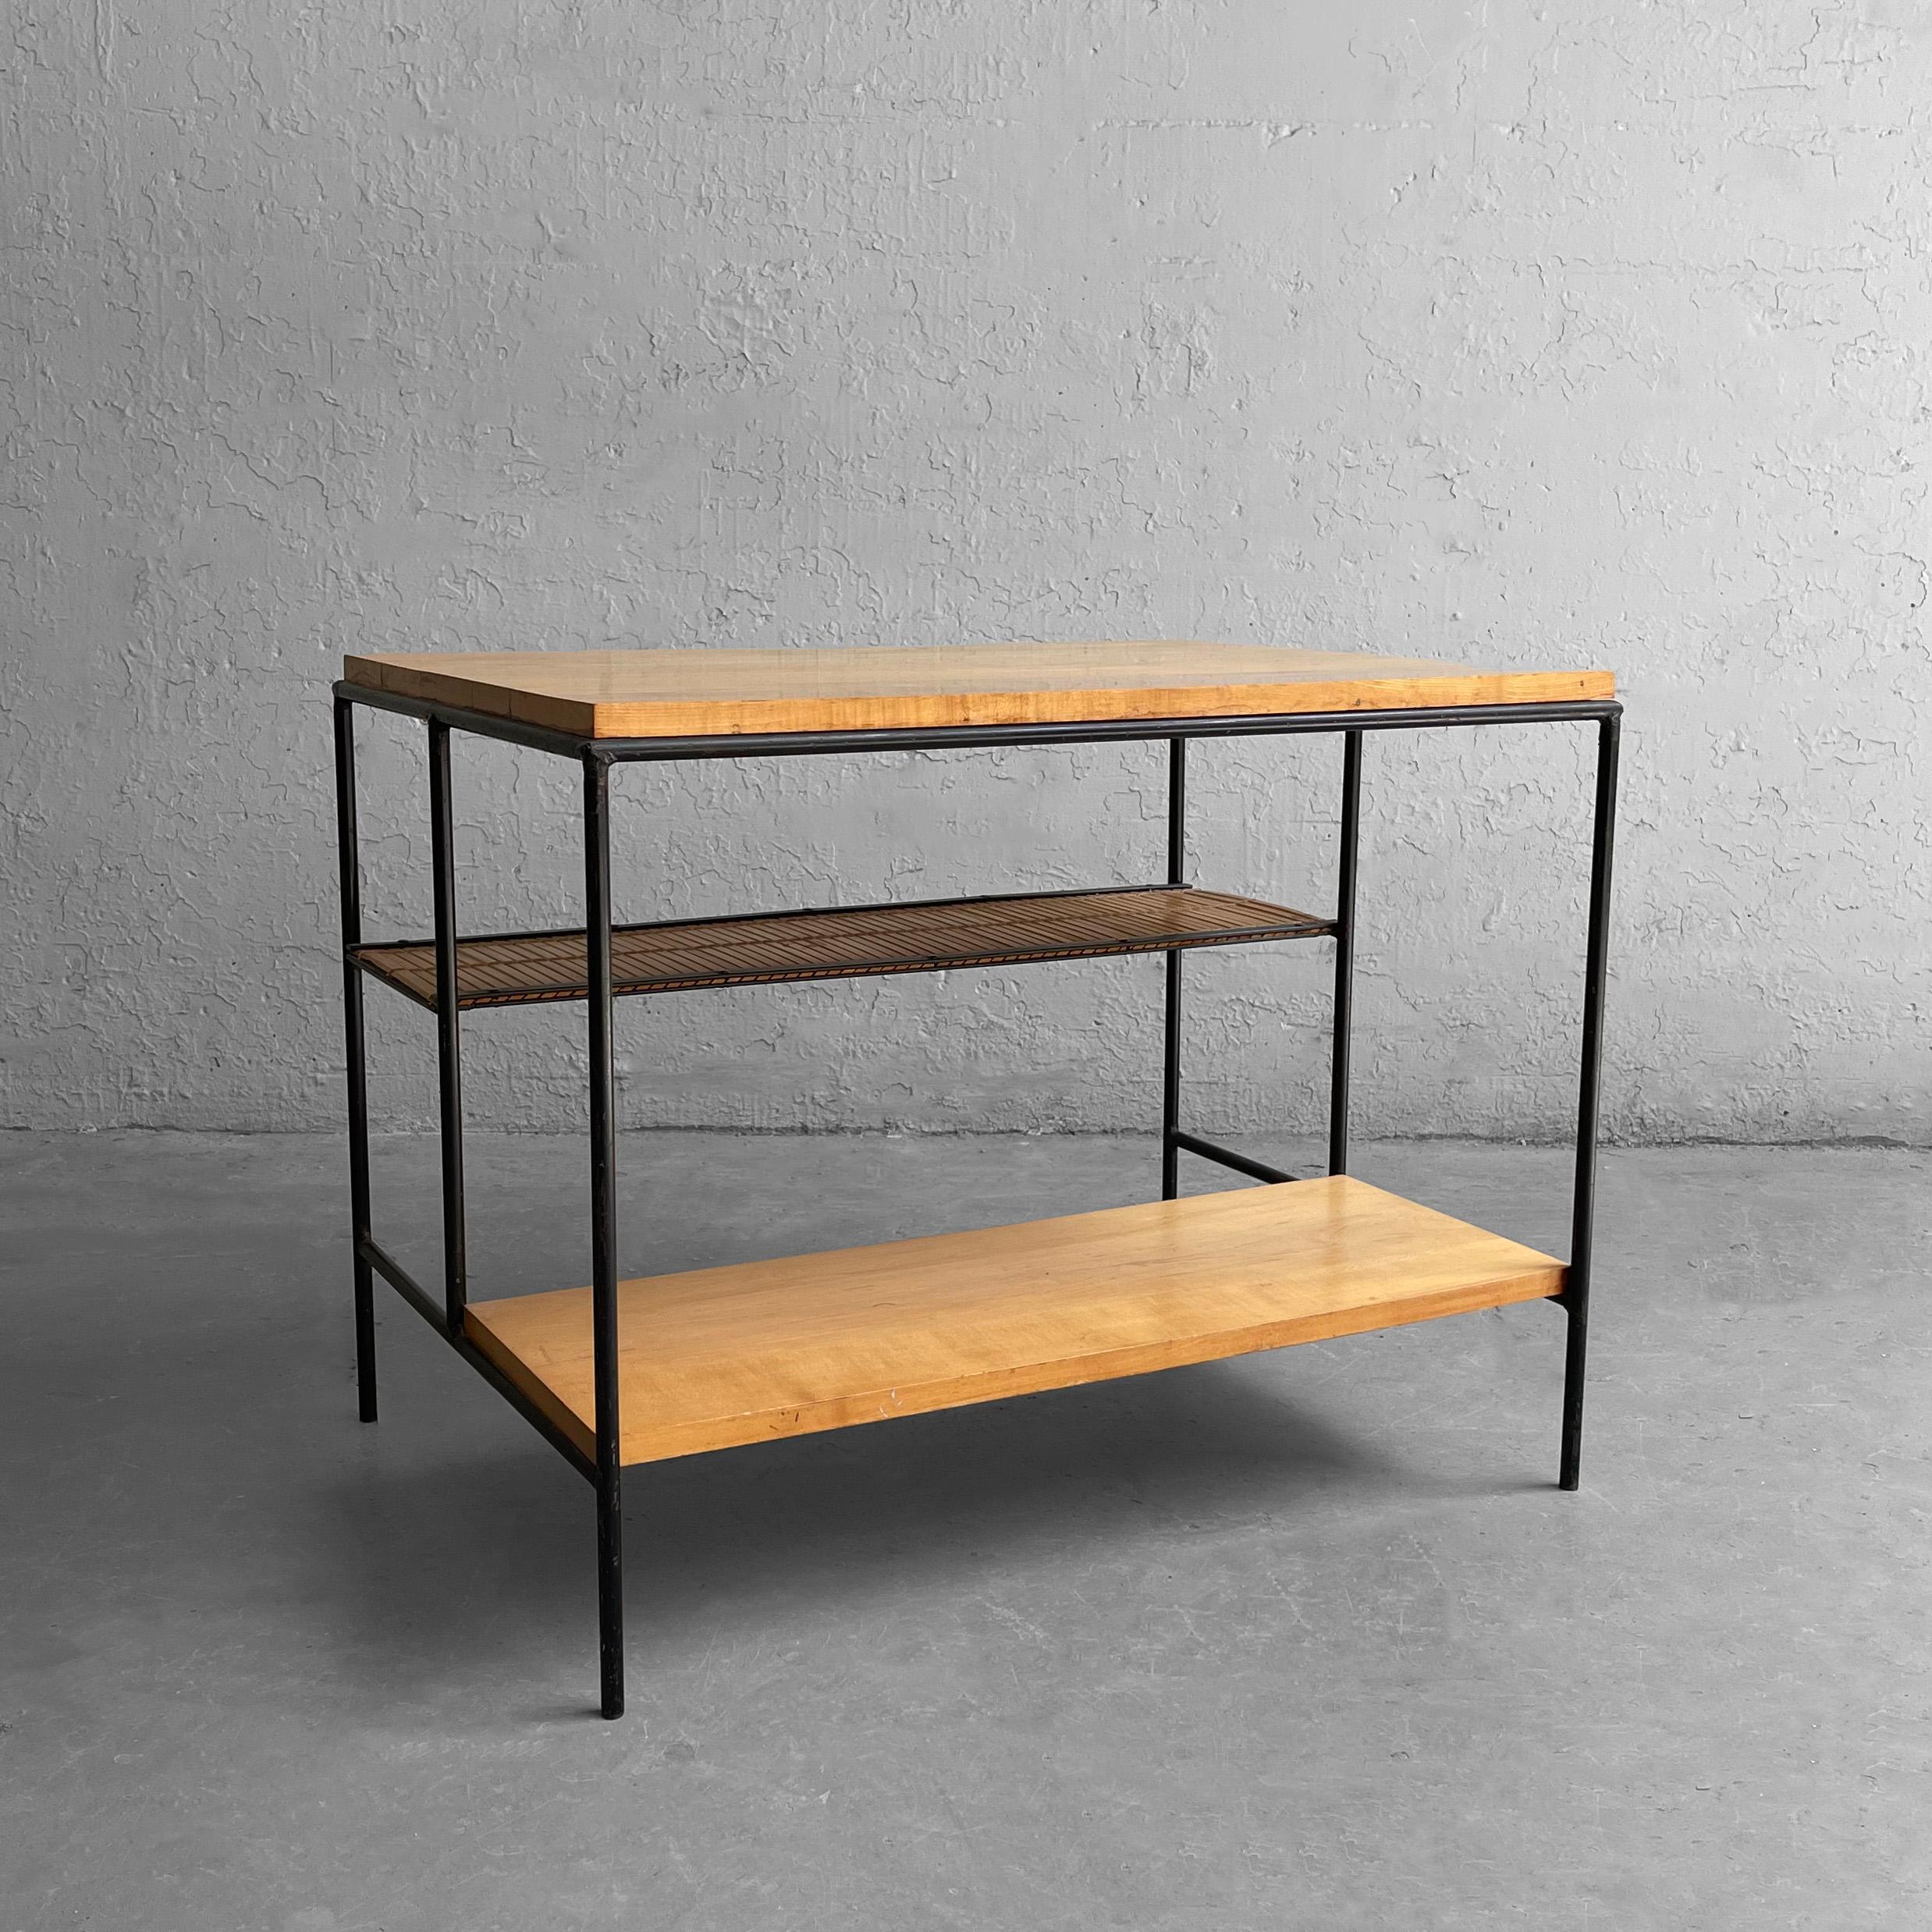 Minimal, mid century modern, side table by Paul McCobb for Planner Group features a wrought iron frame with graduated tiers of maple and slat maple. The lower tier is 6.5 inches height and 10 inches deep and the middle tier is 14 inches height and